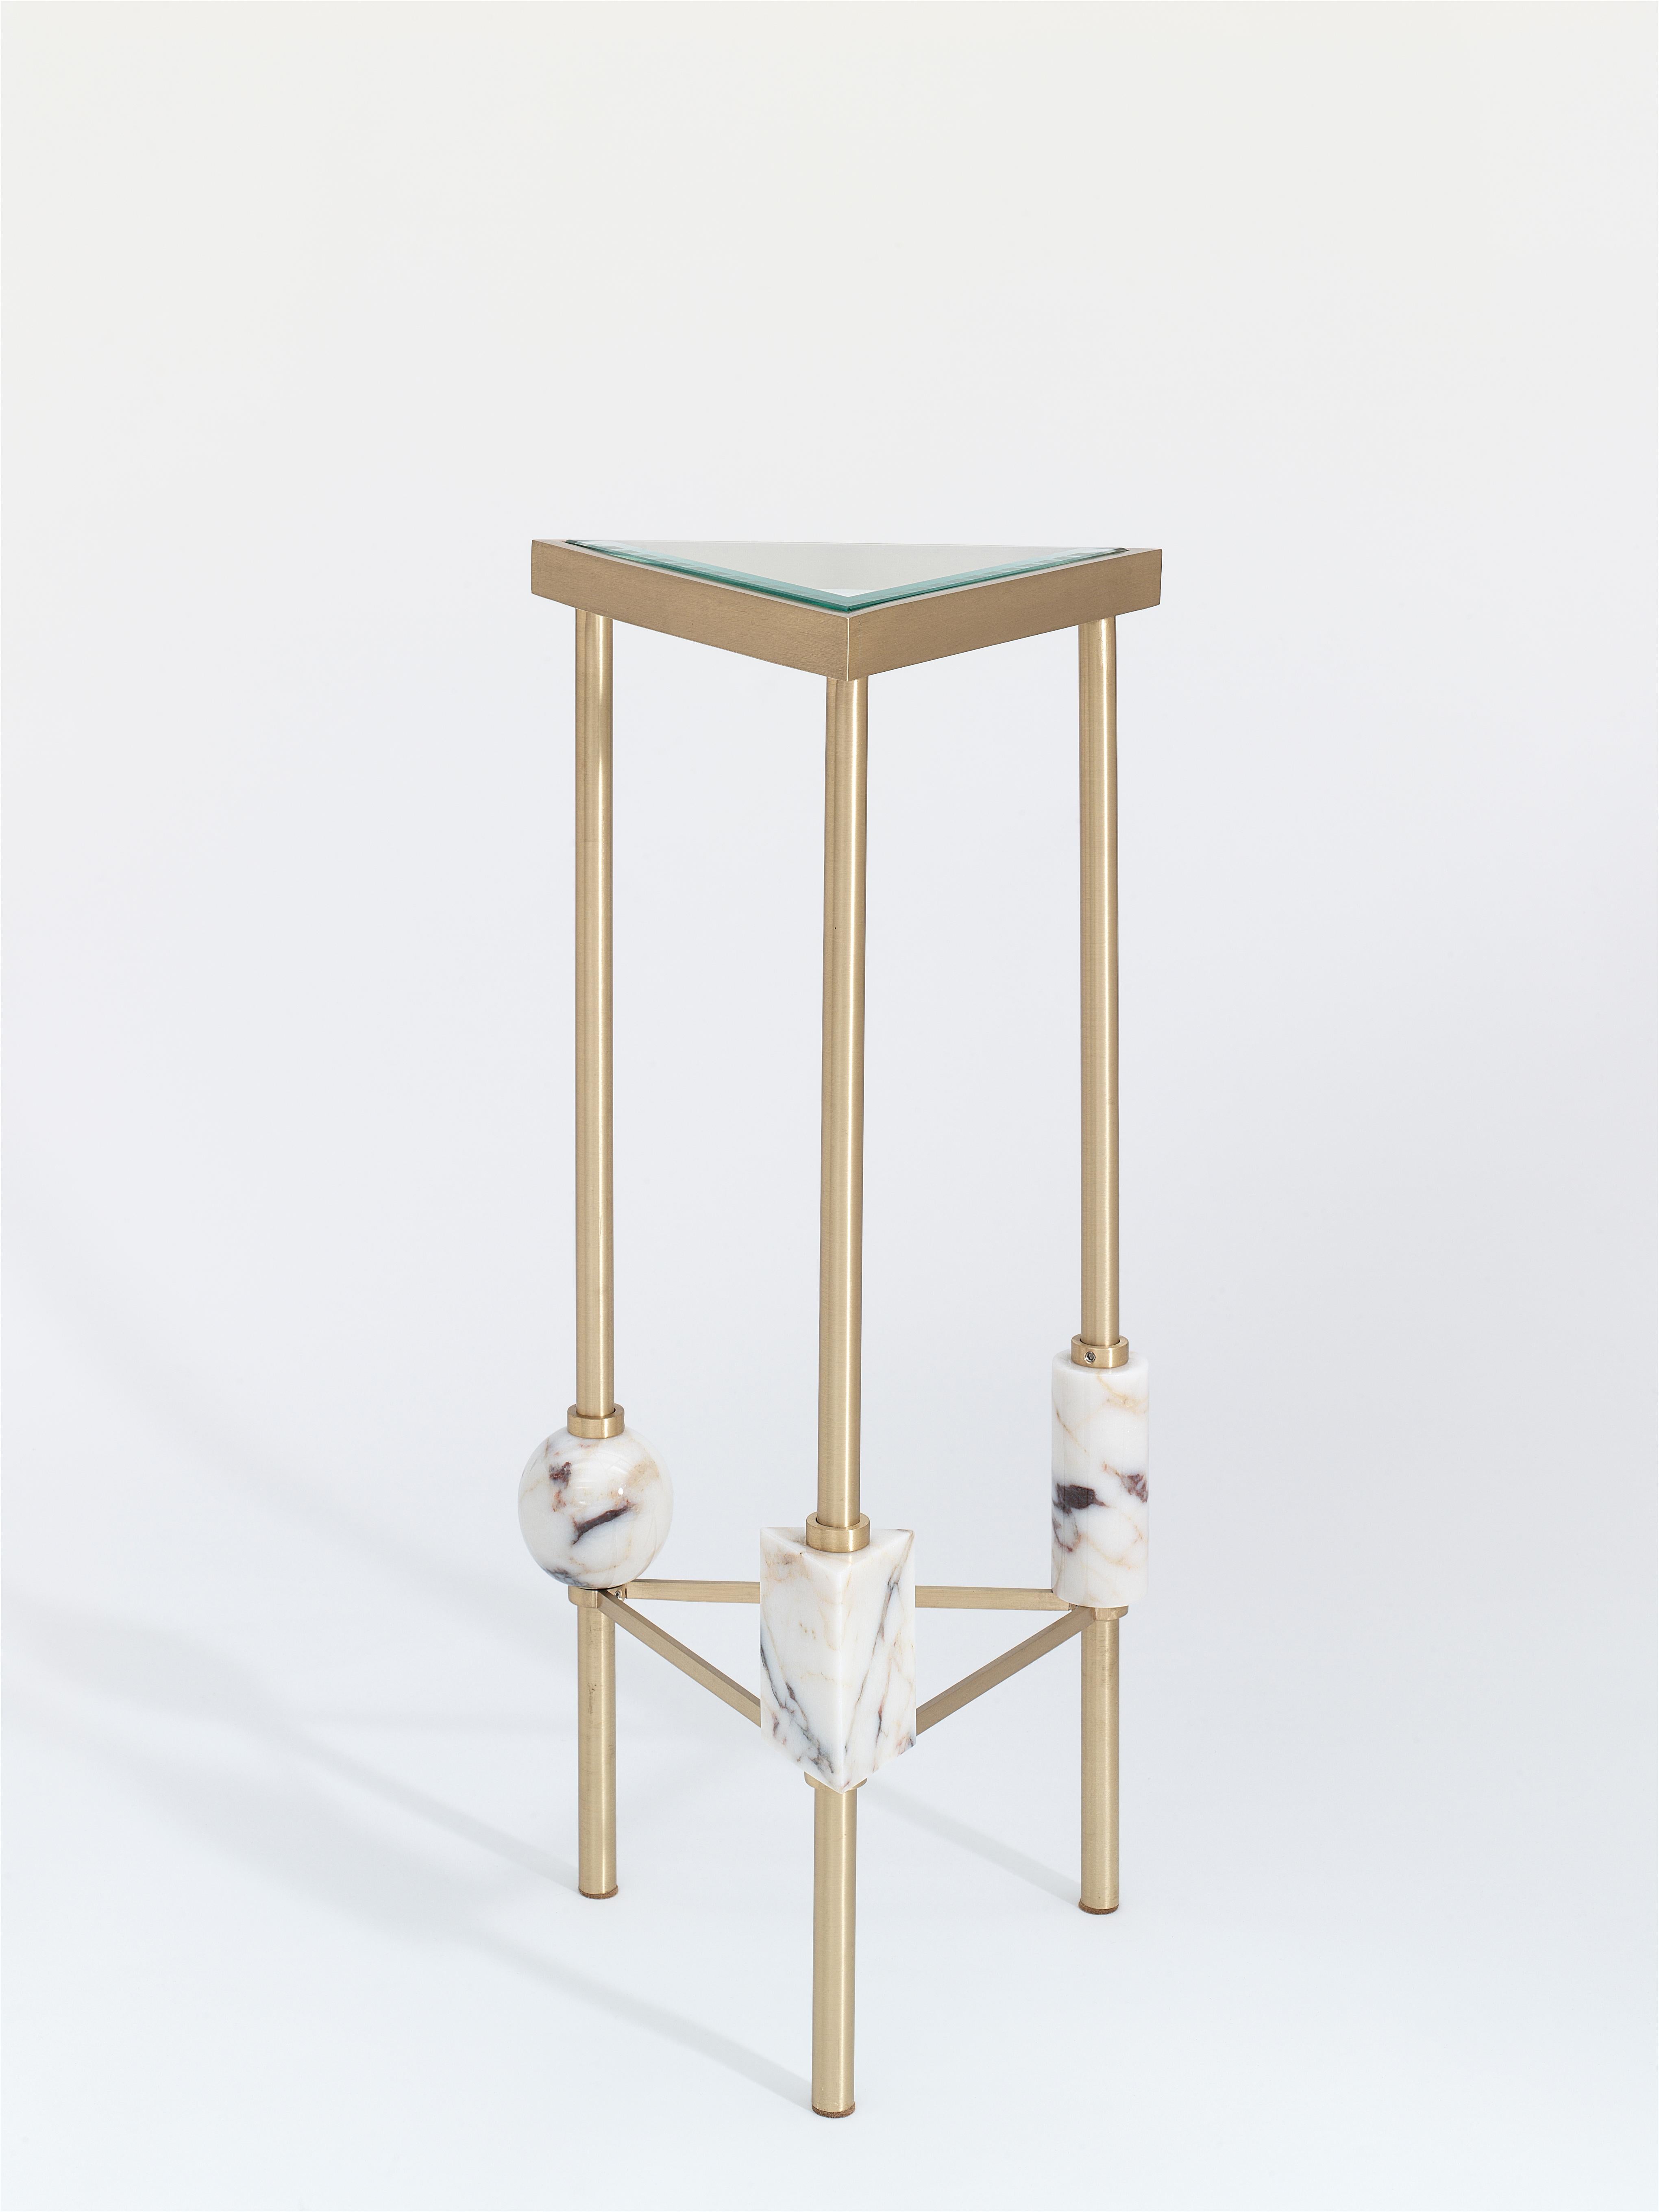 Plato cocktail table, white, by Yasemin Toygar
Handmade
Dimensions: W 33 x D 33 x H 70 cm
Materials: Brass, marble, glass.

Plato Collection

Inspired by the geometric still life, Plato explores and defies the boundaries of sensory experience